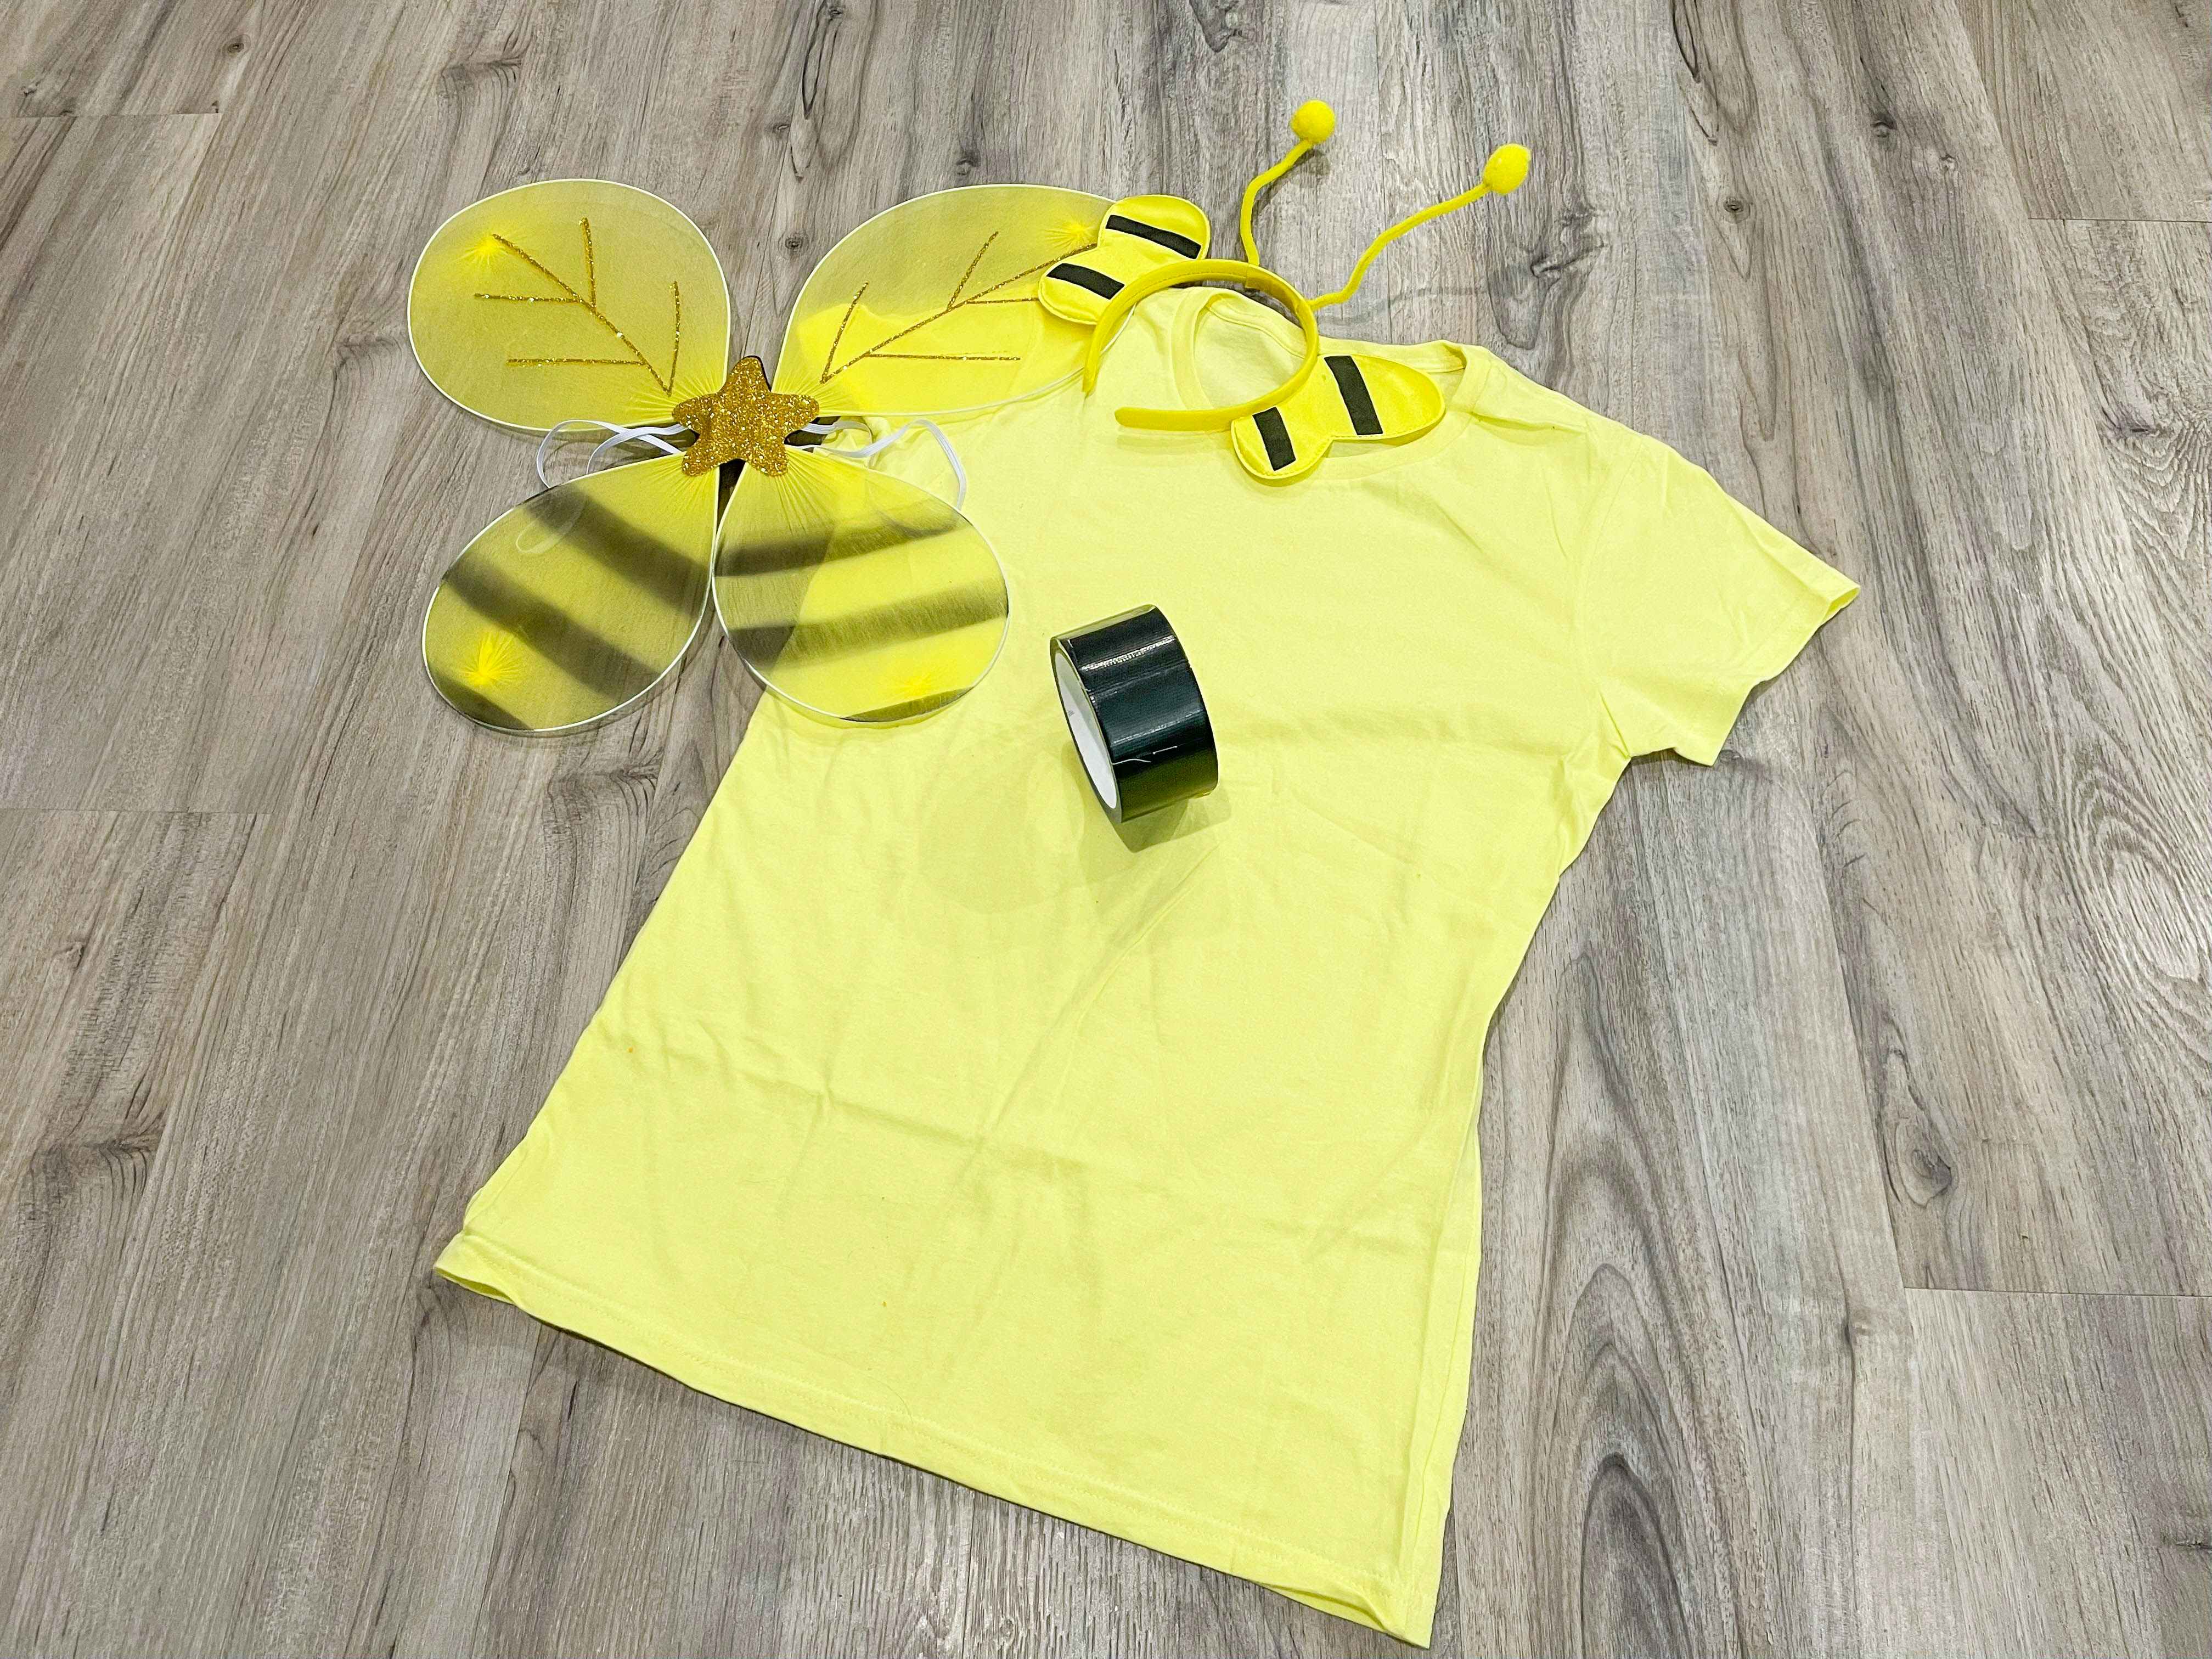 A yellow shirt and bee costume items lying on the floor together.